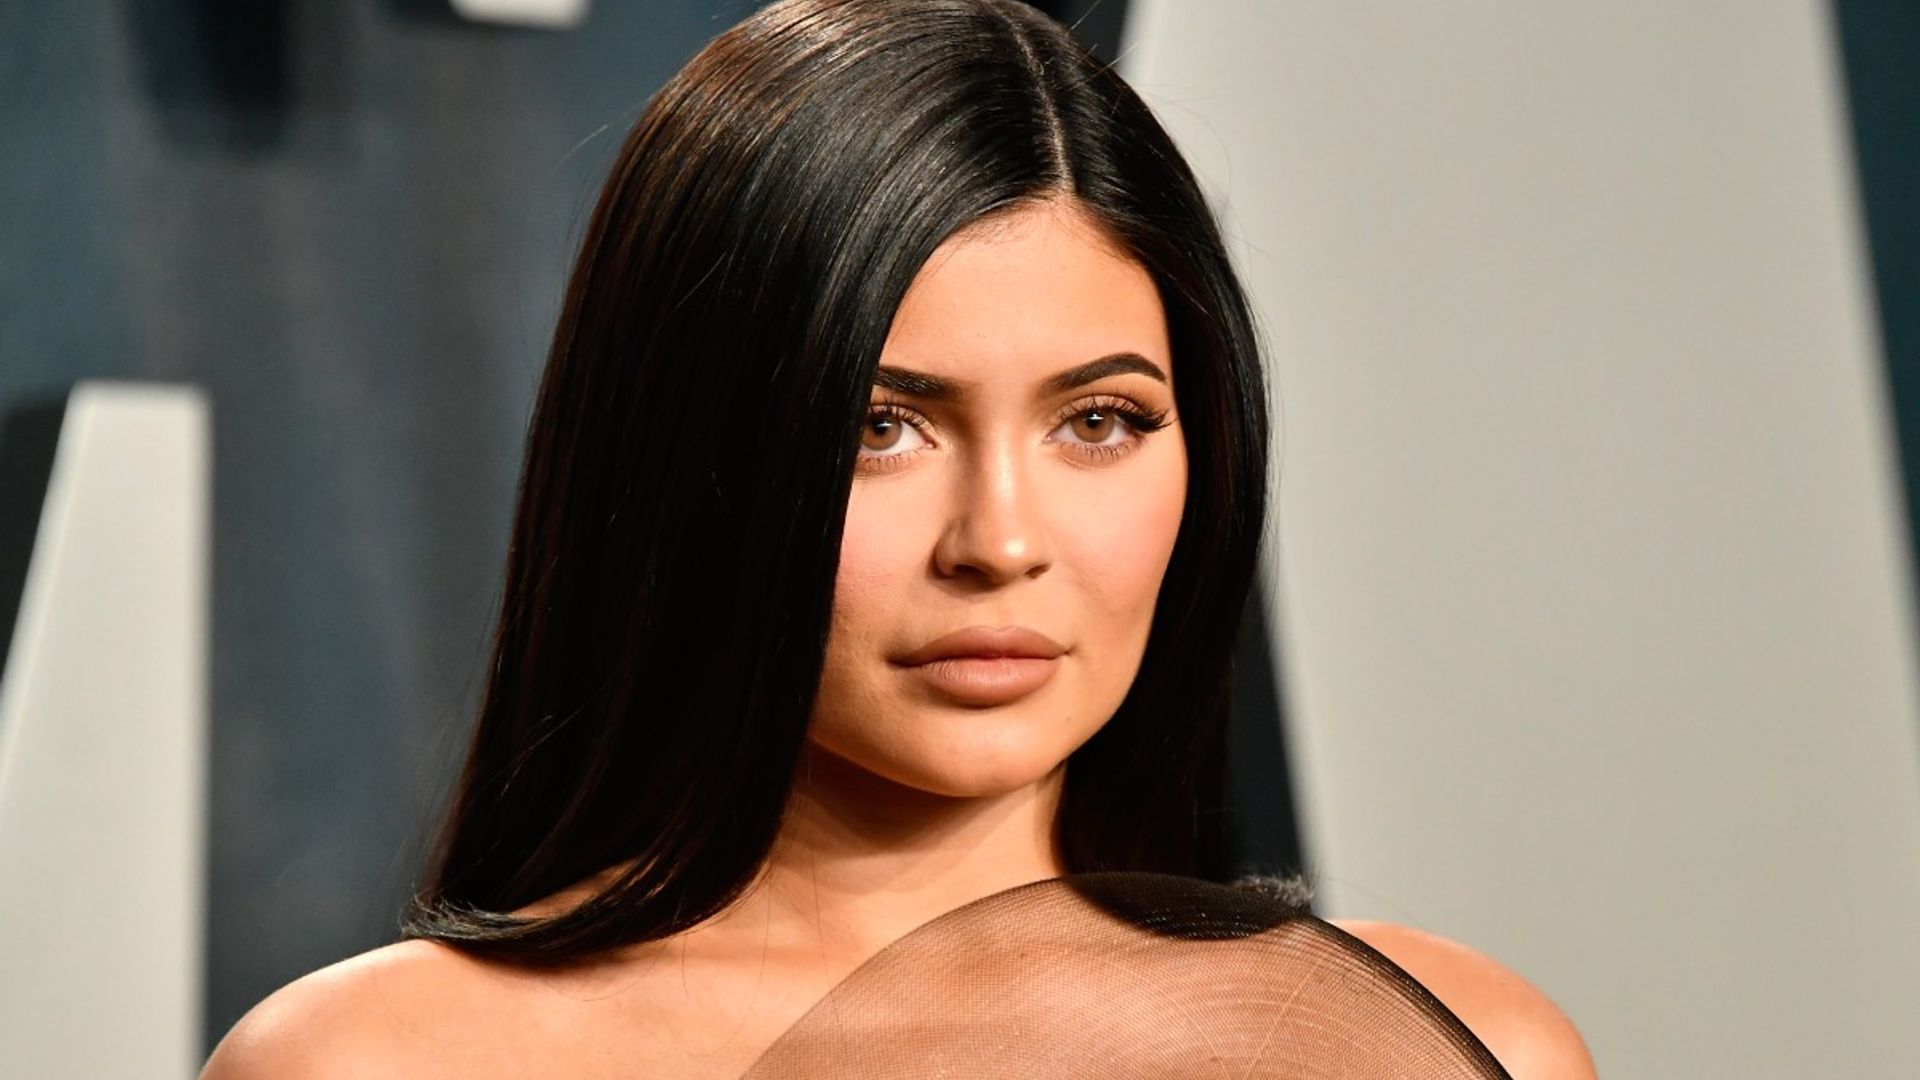 Kylie Jenner leaves fans speechless in risque lingerie - wow!